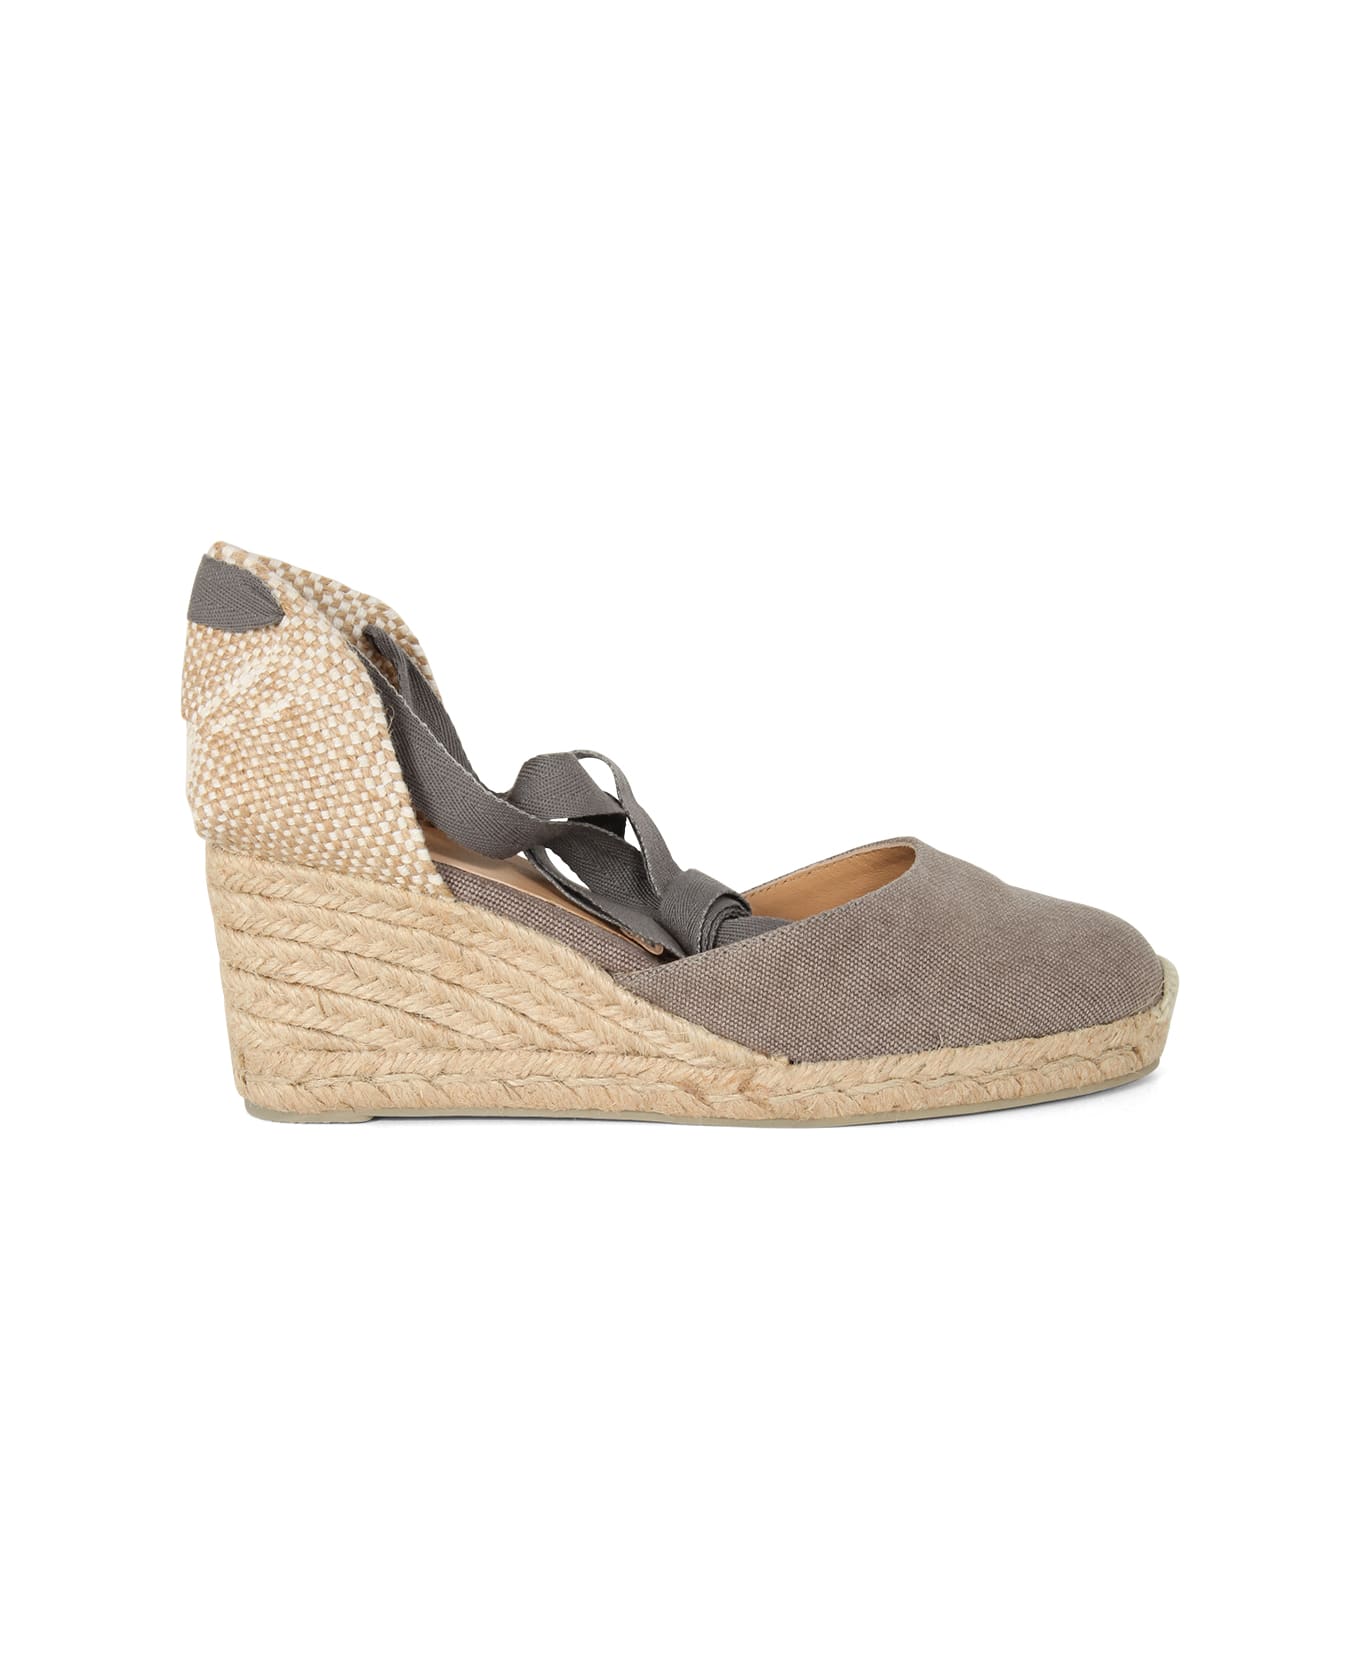 Castañer Carina Espadrilles Wedge Sandal With Ankle Laces - Lead Grey ウェッジシューズ